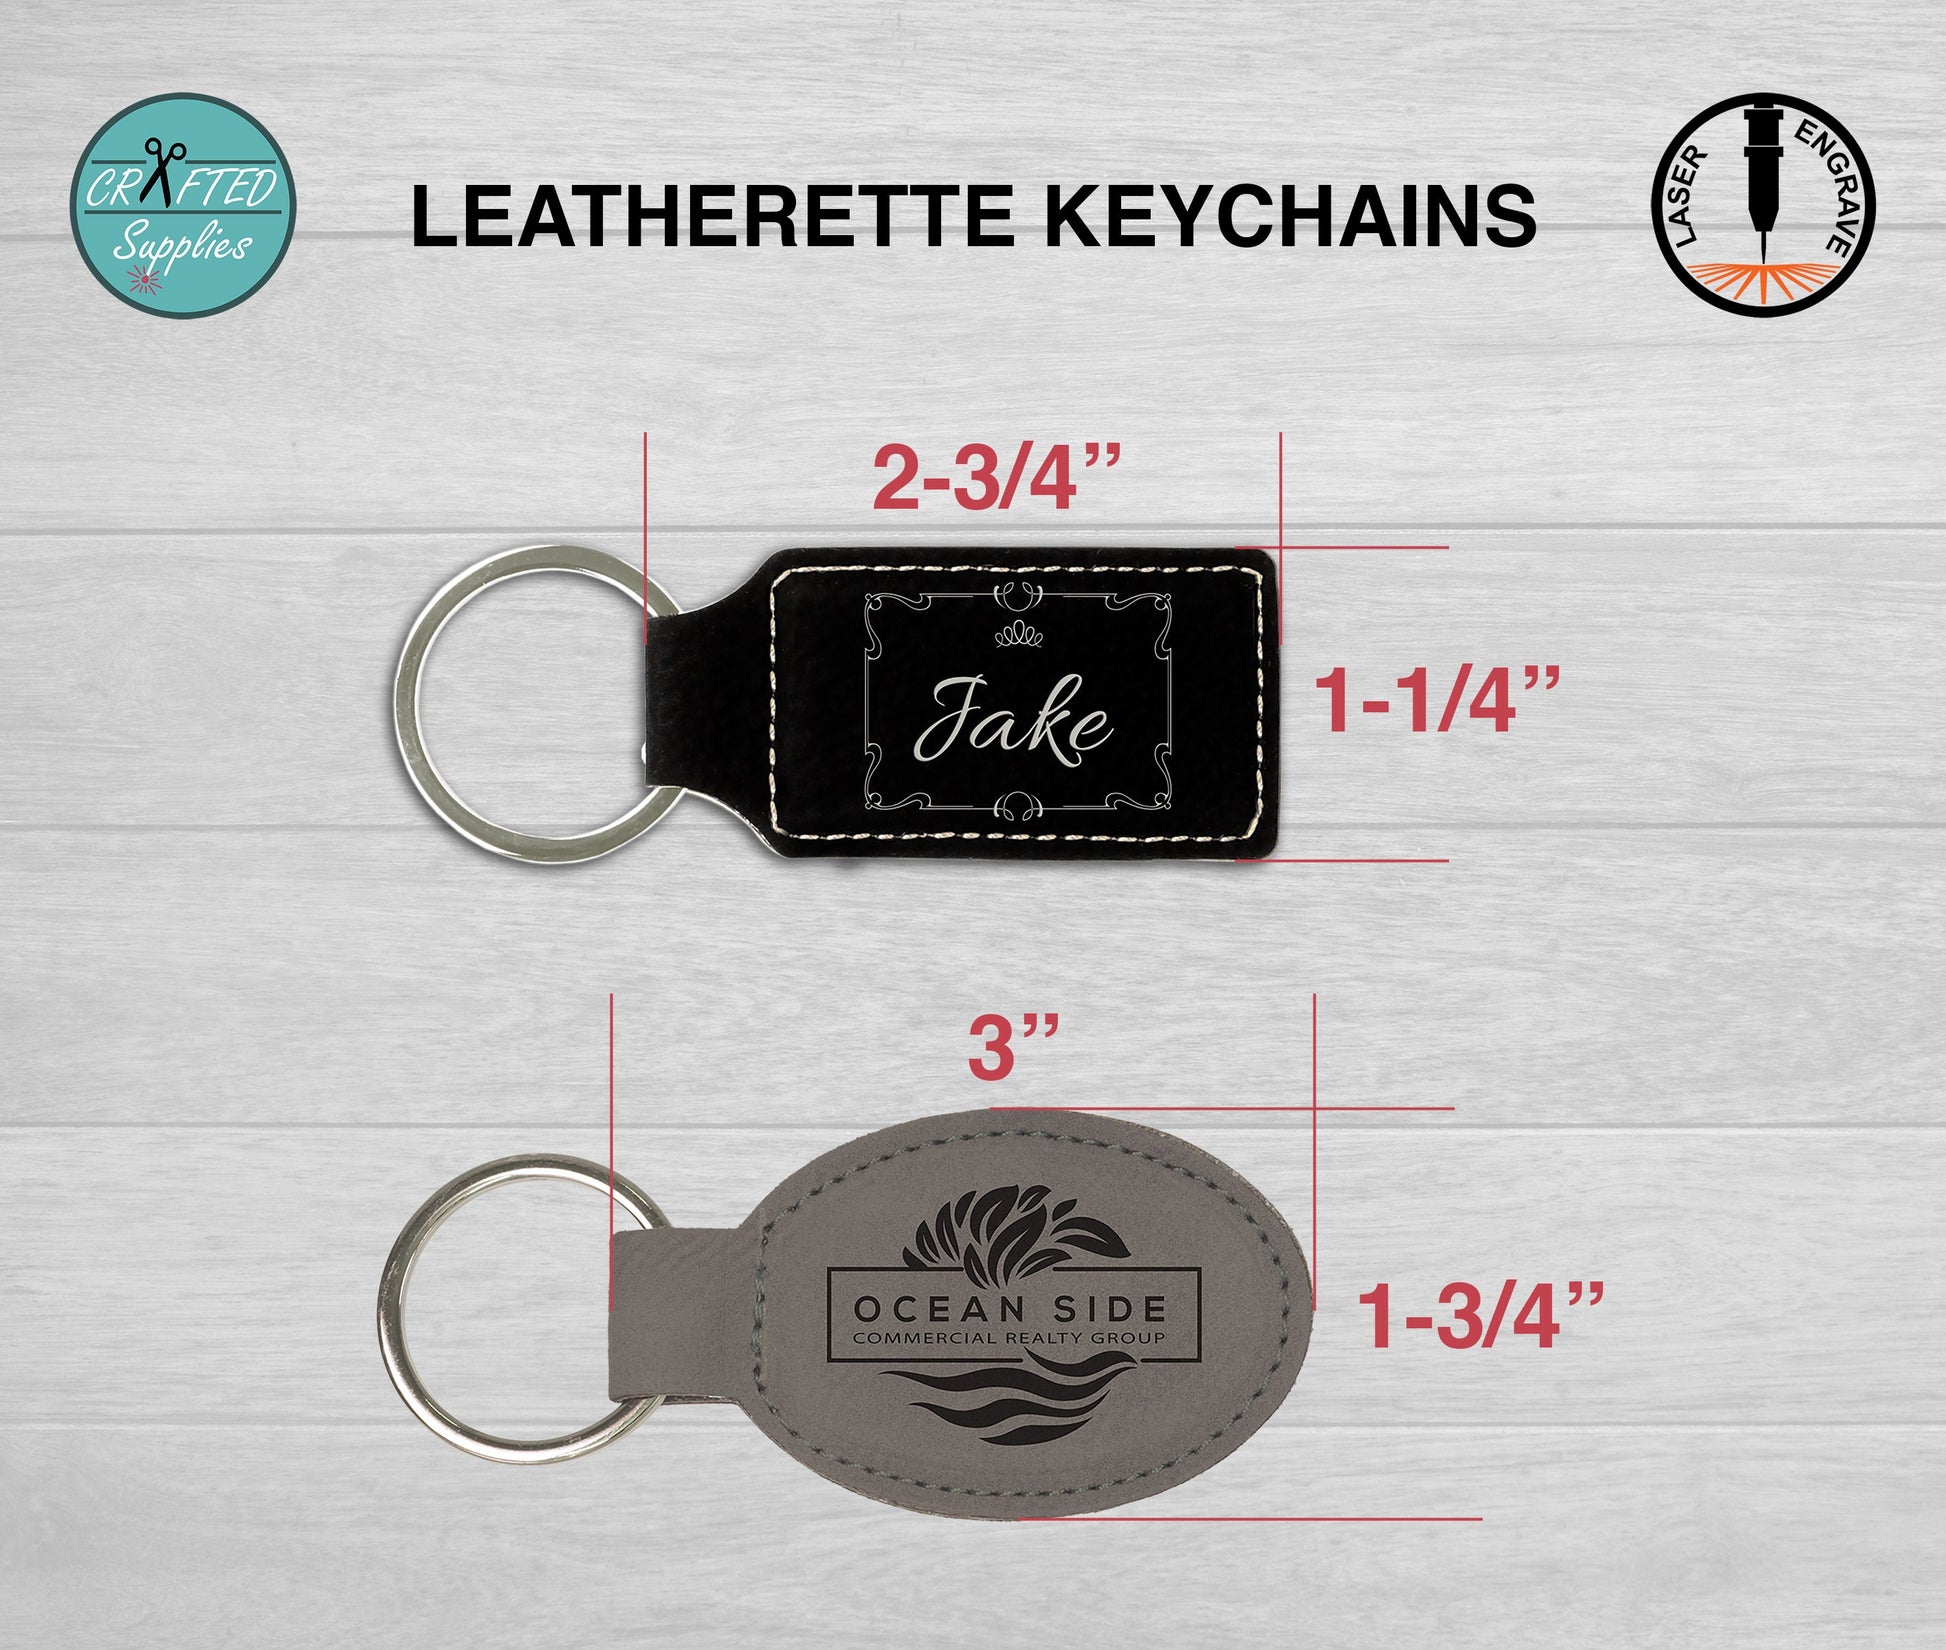 PitkaLeather 10 Pack Blank Leather Keychains Kit| Laser Engraving, Foil stamping-Fundraising Ideas-Promotional, Business, Personalized Gifts